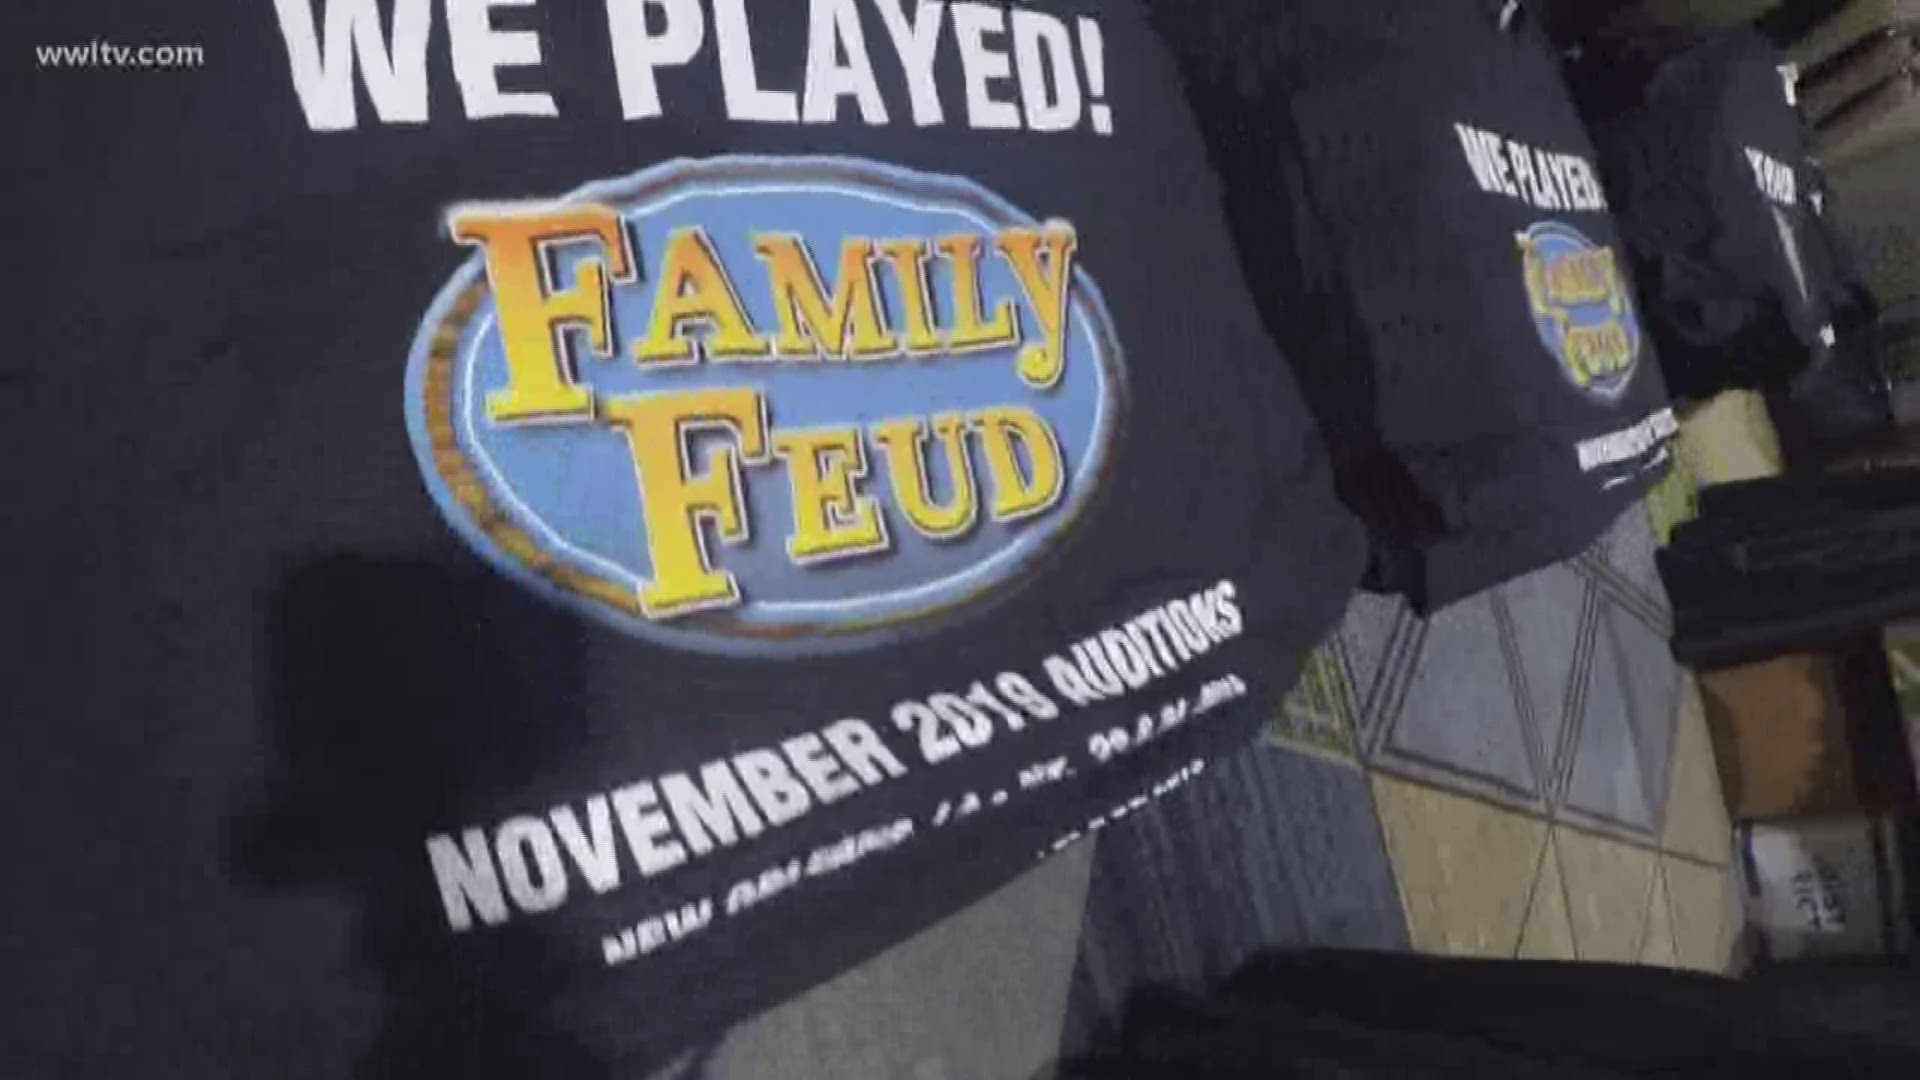 Local families try out for Family Feud | wwltv.com